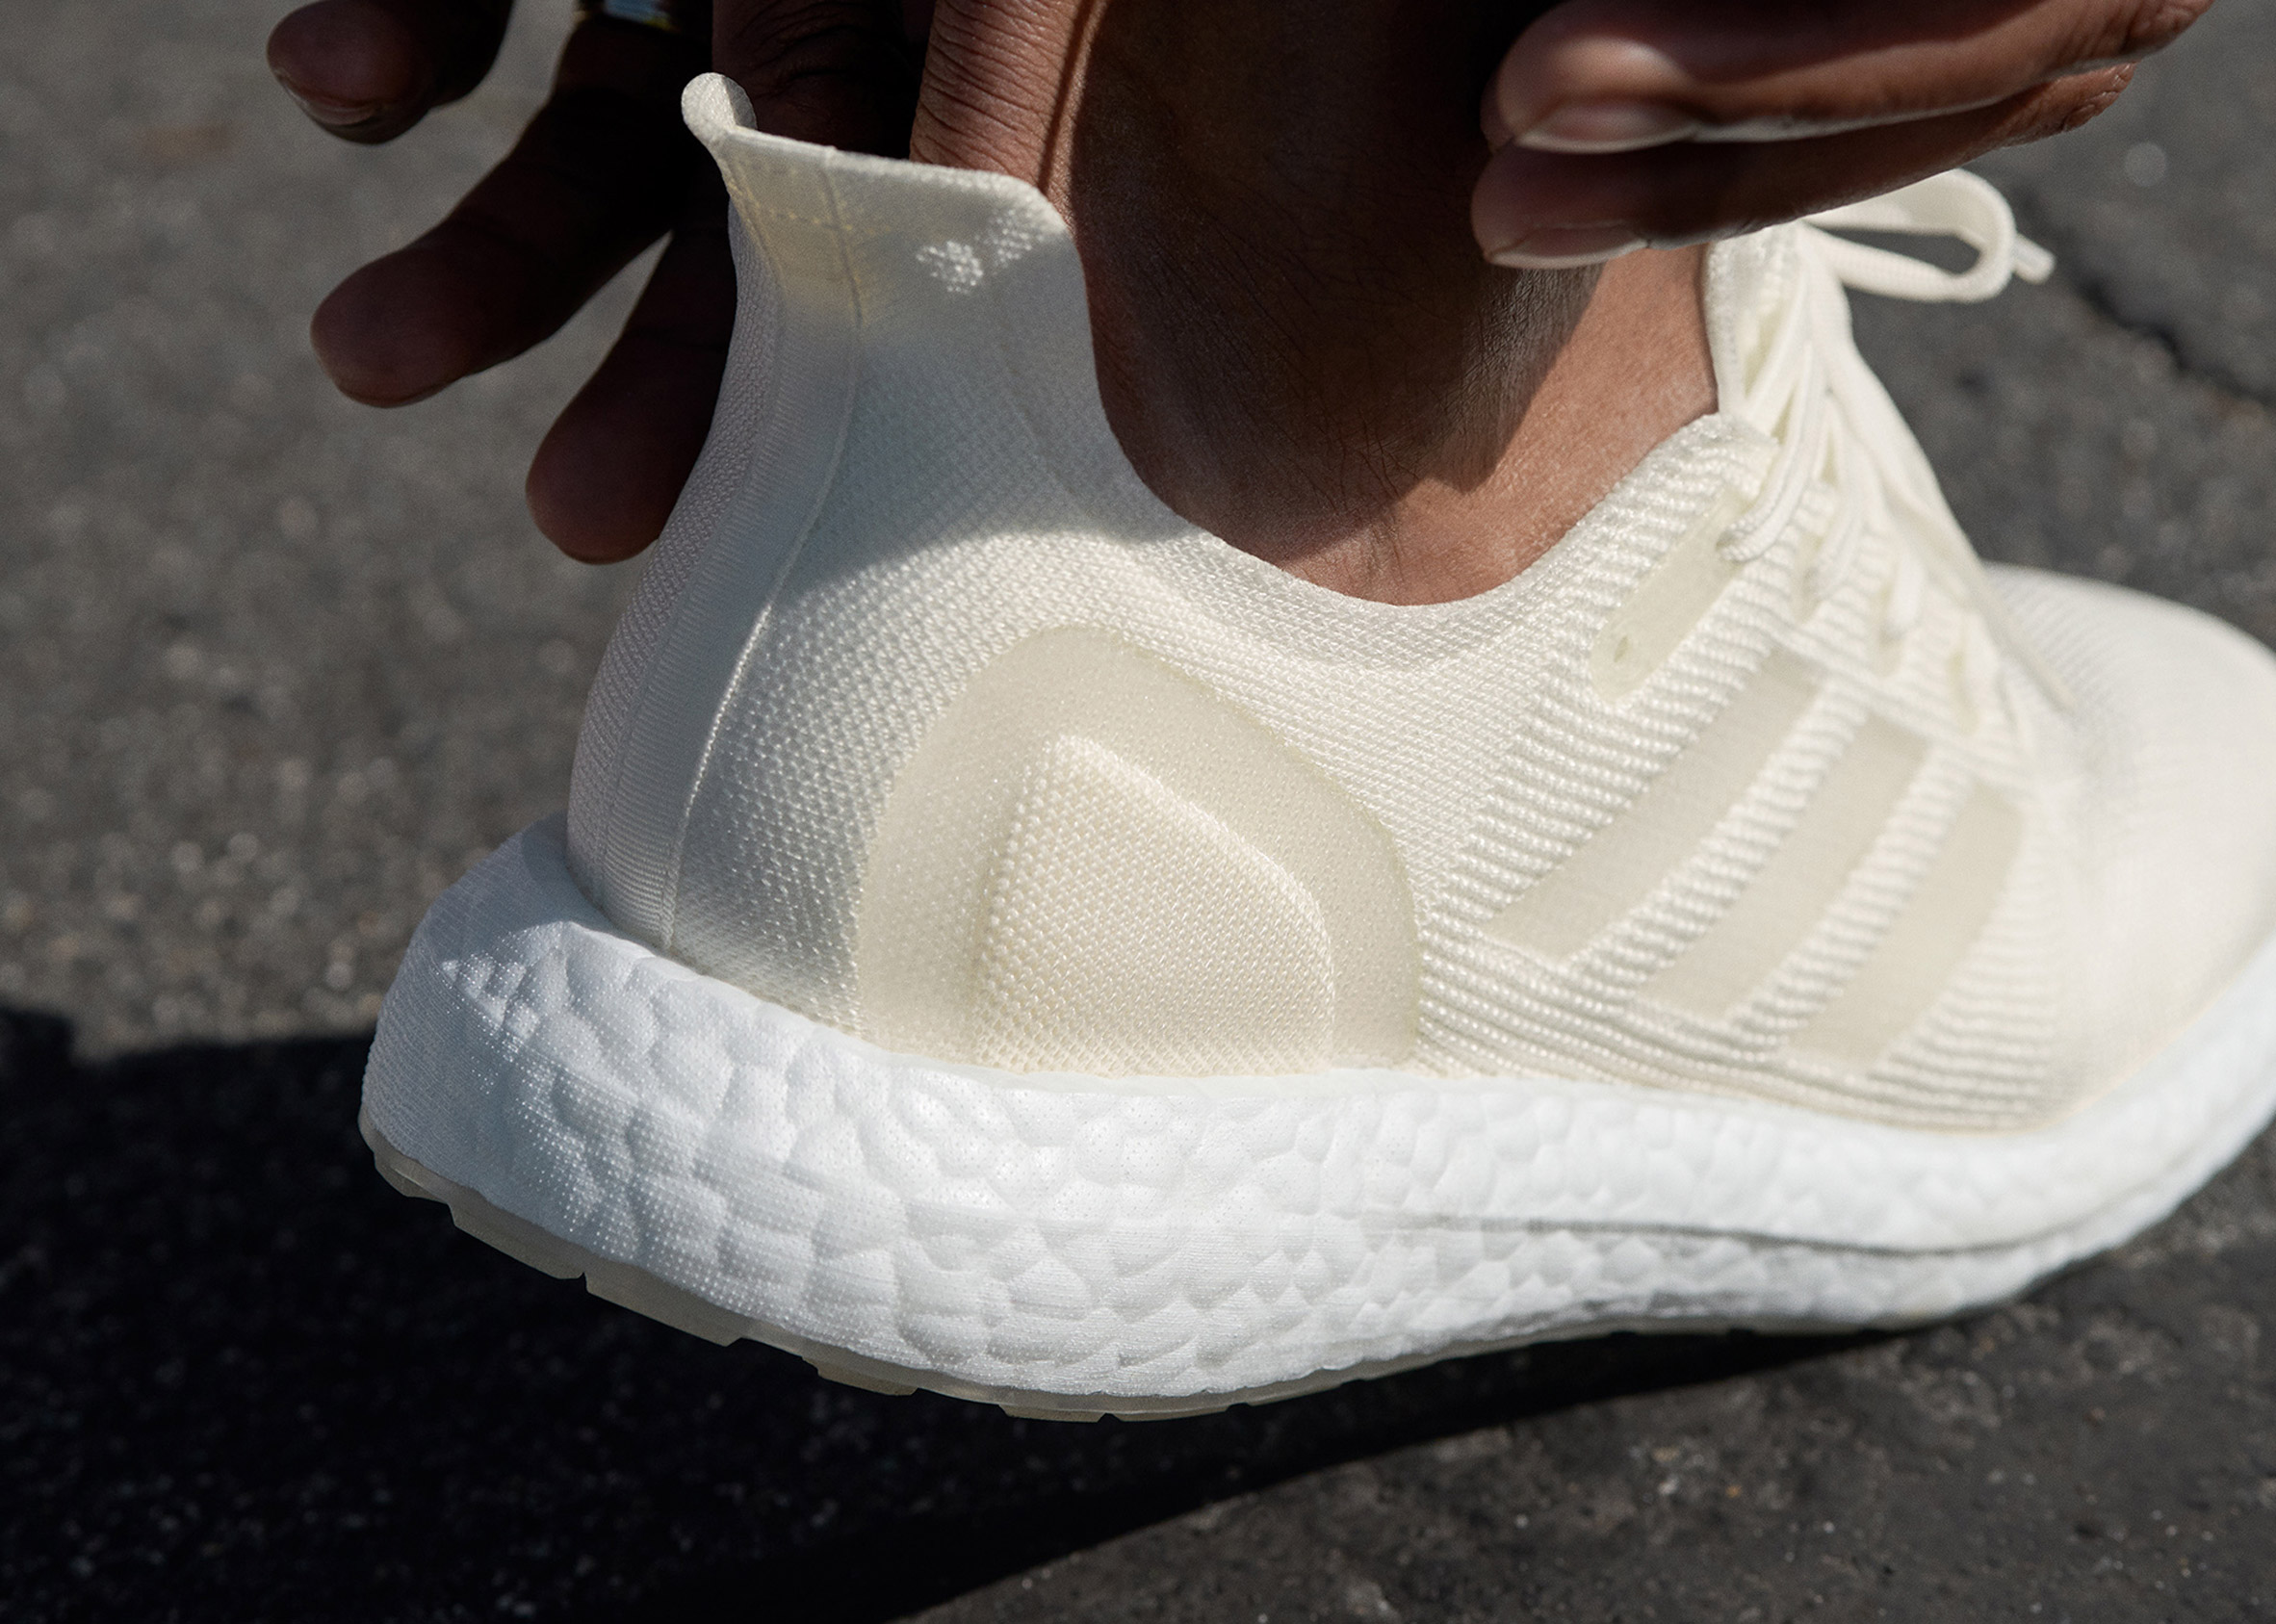 Adidas unveils fully recyclable Futurecraft Loop